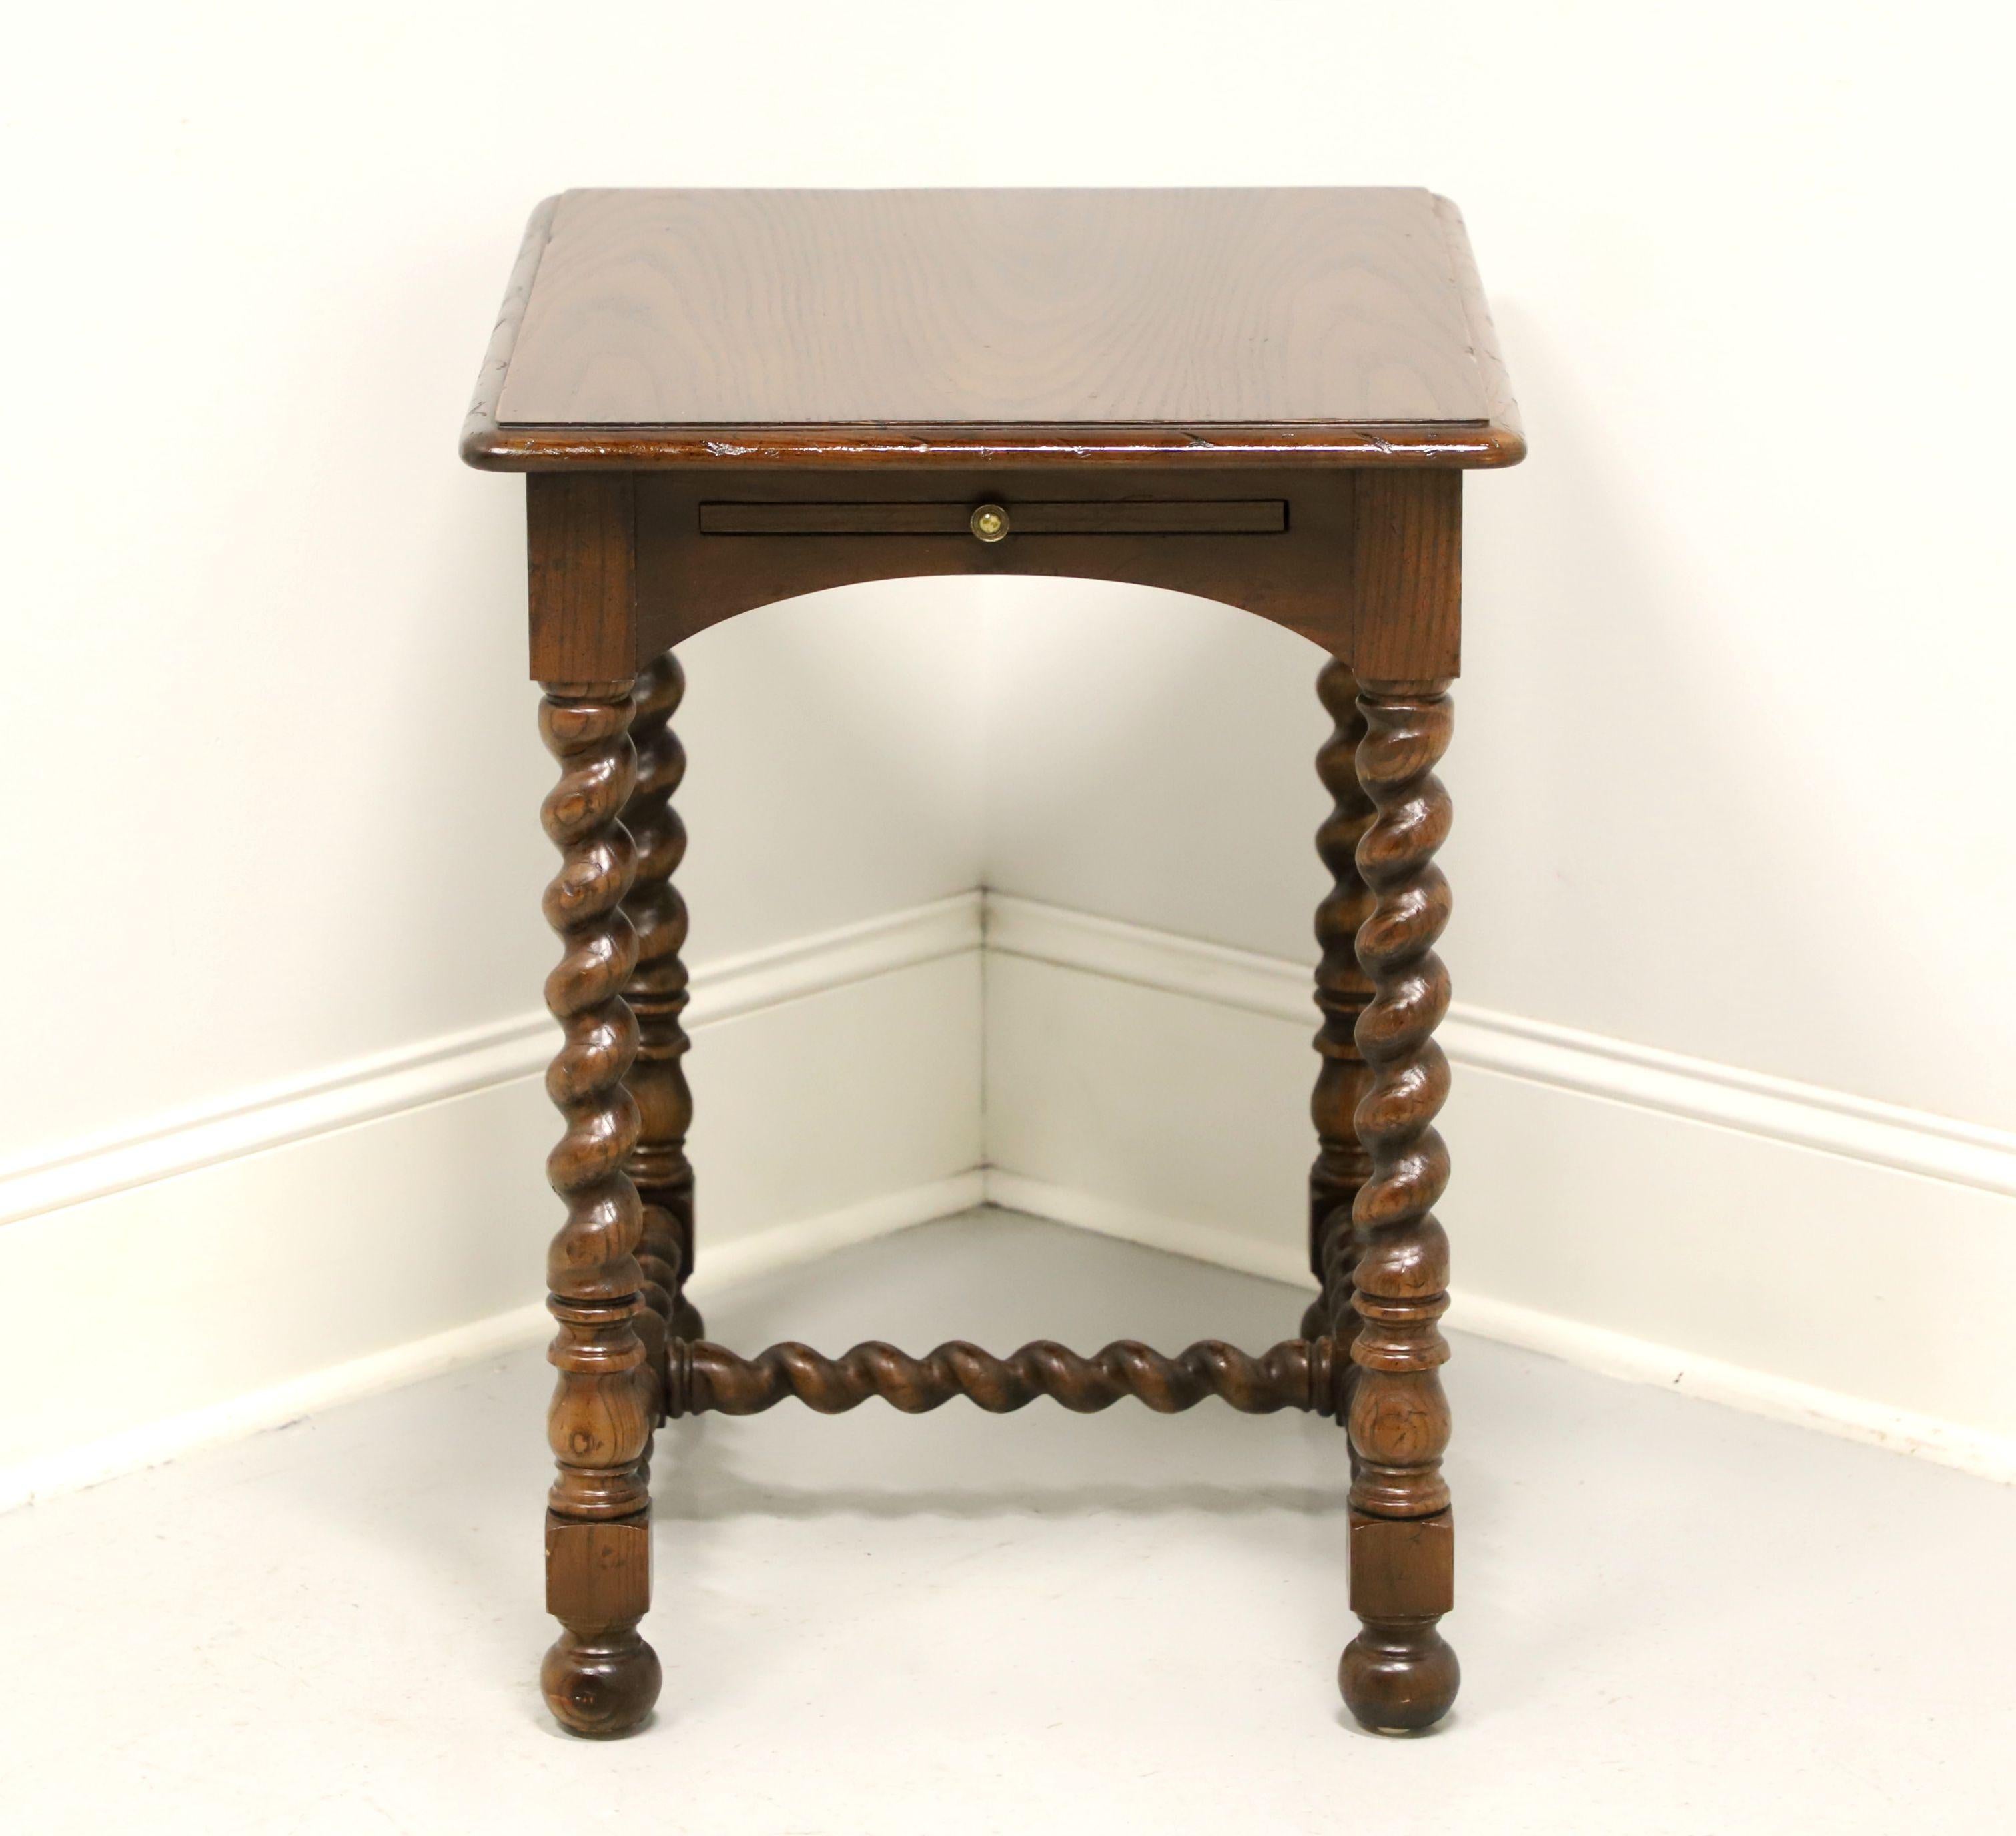 A French Country style side table by Henredon. Oak with a dark stain, slight distressing, pull-out tray, barley twist legs and stretchers. Features a laminate top pull-out tray surface with a brass knob. Made in Morganton, North Carolina, USA, in